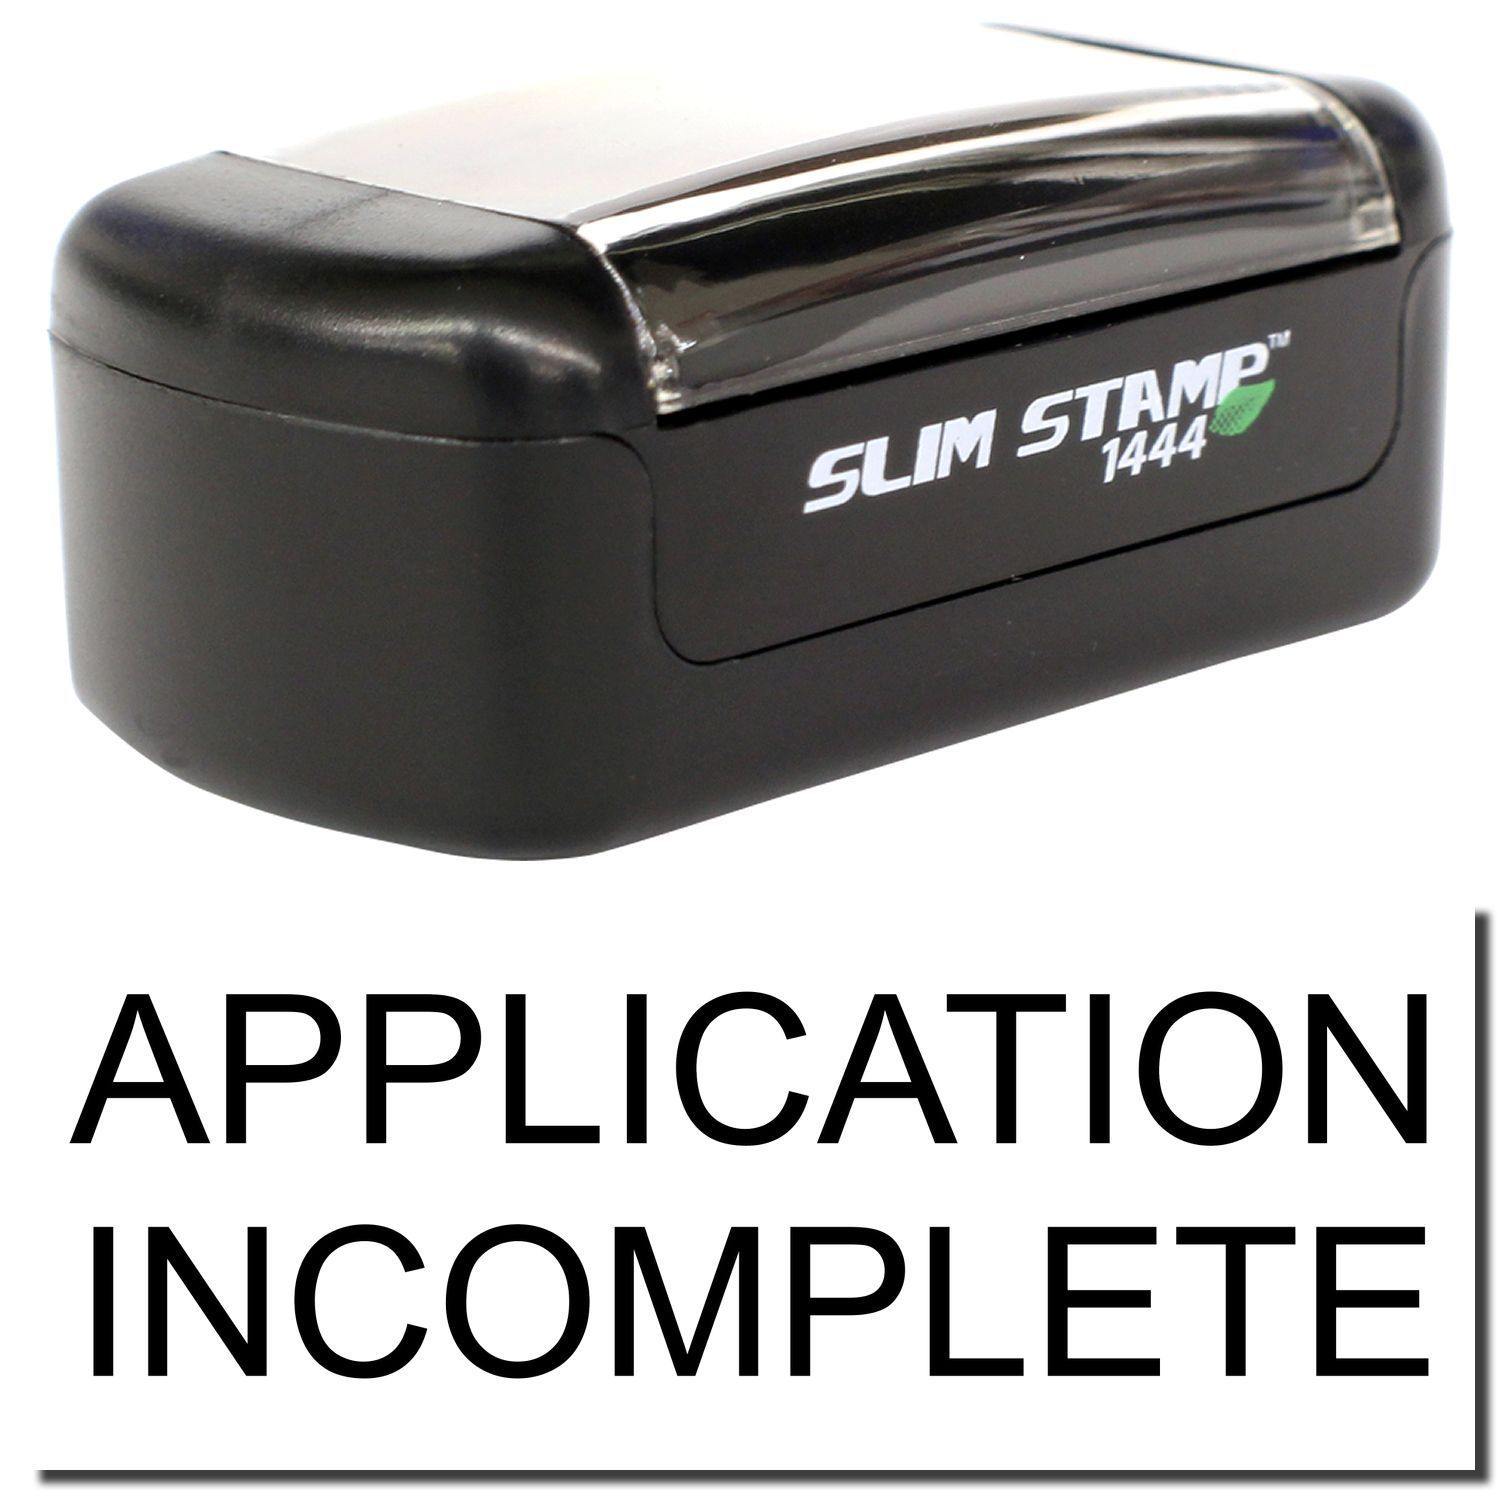 A stock office pre-inked stamp with a stamped image showing how the text "APPLICATION INCOMPLETE" is displayed after stamping.